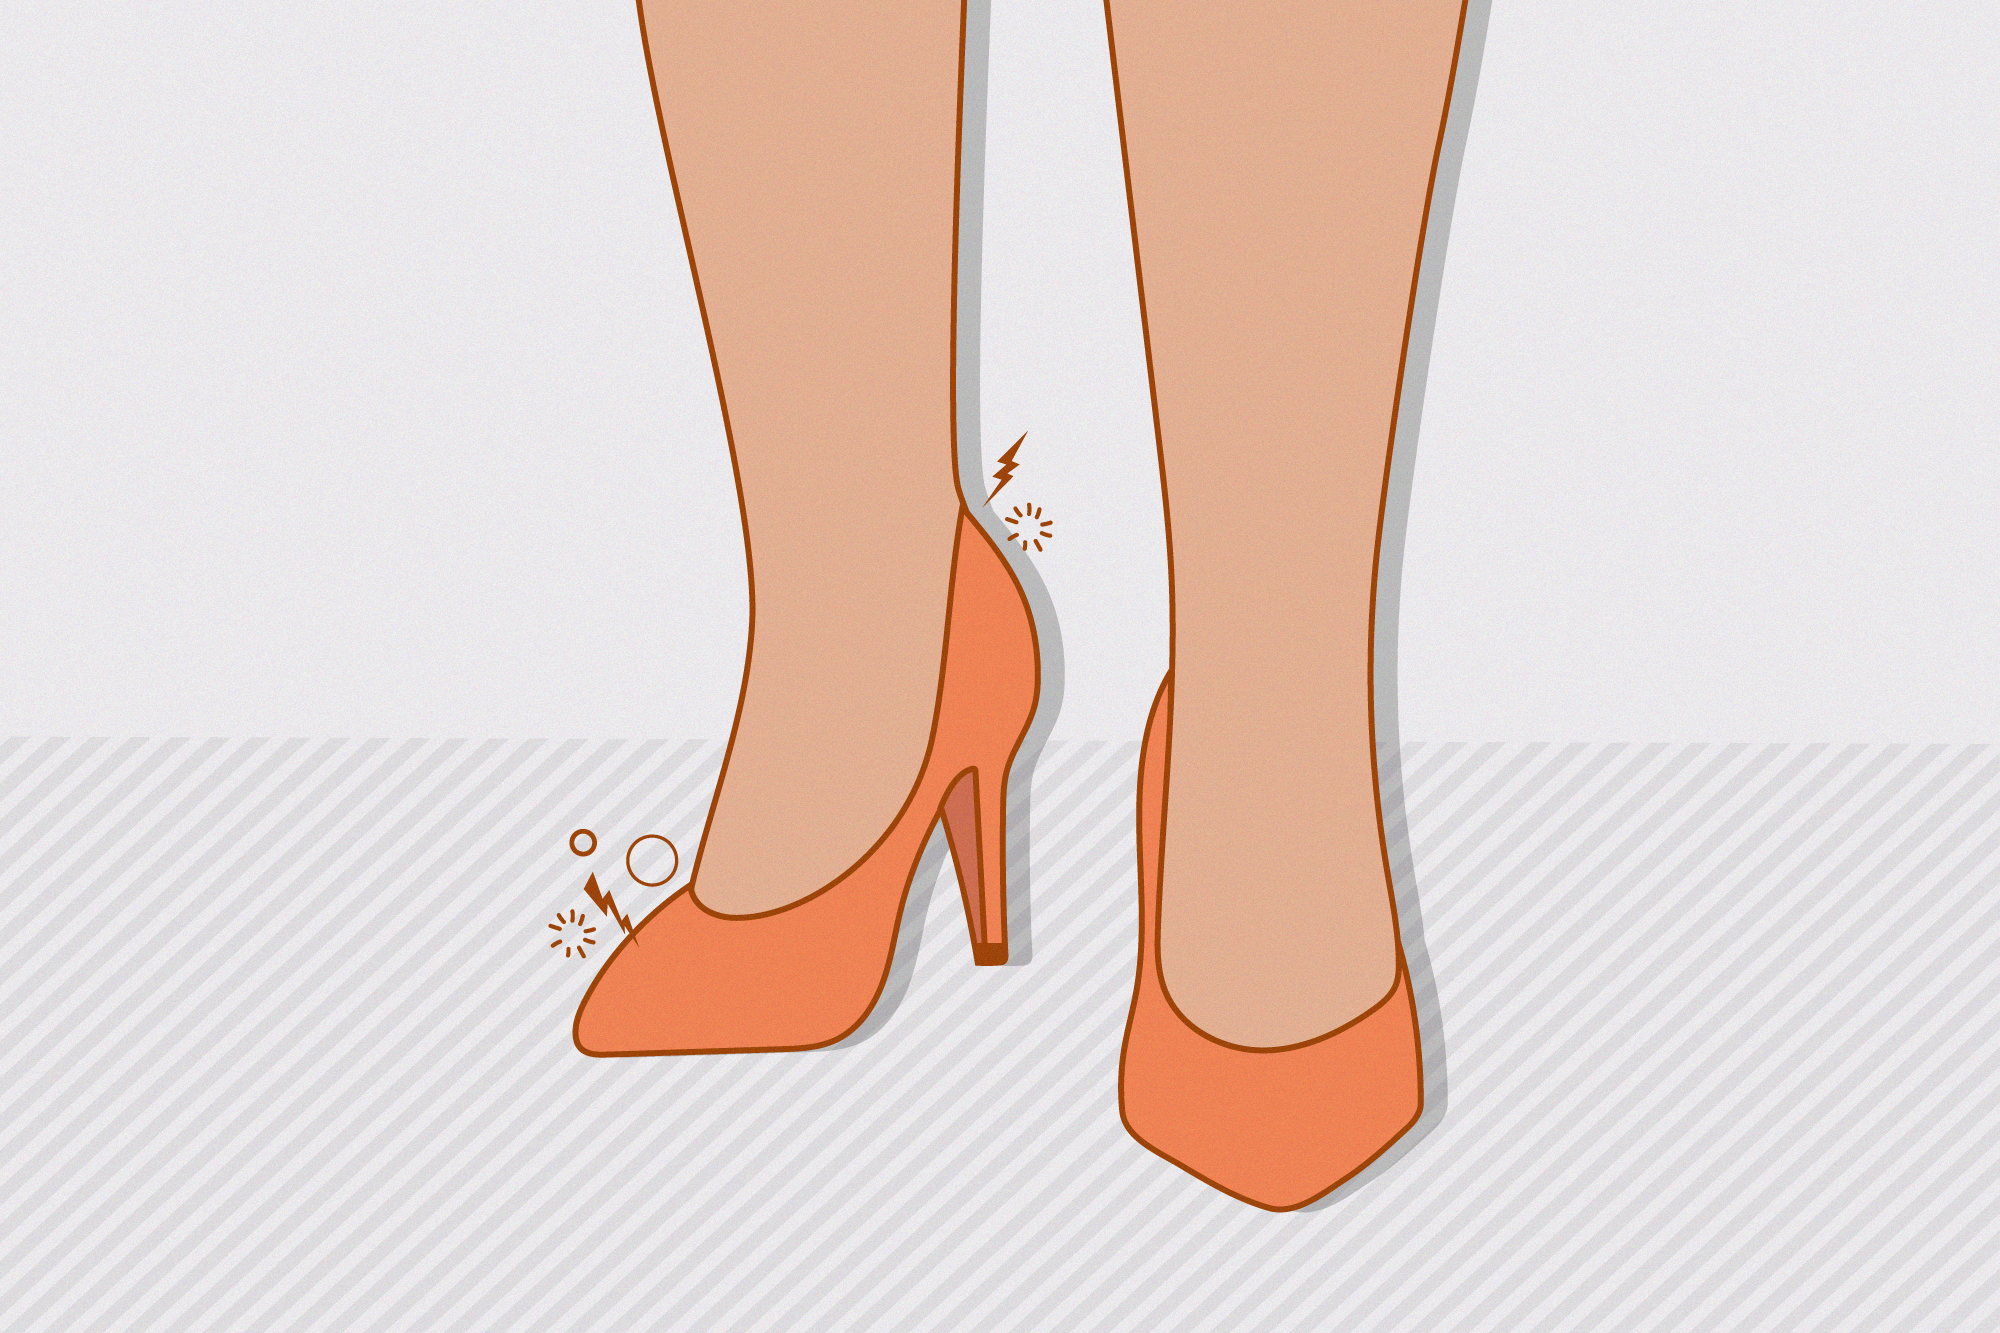 Ee Na Lai on LinkedIn: Wearing high heels might make women feel favoured  and lifted in stature…